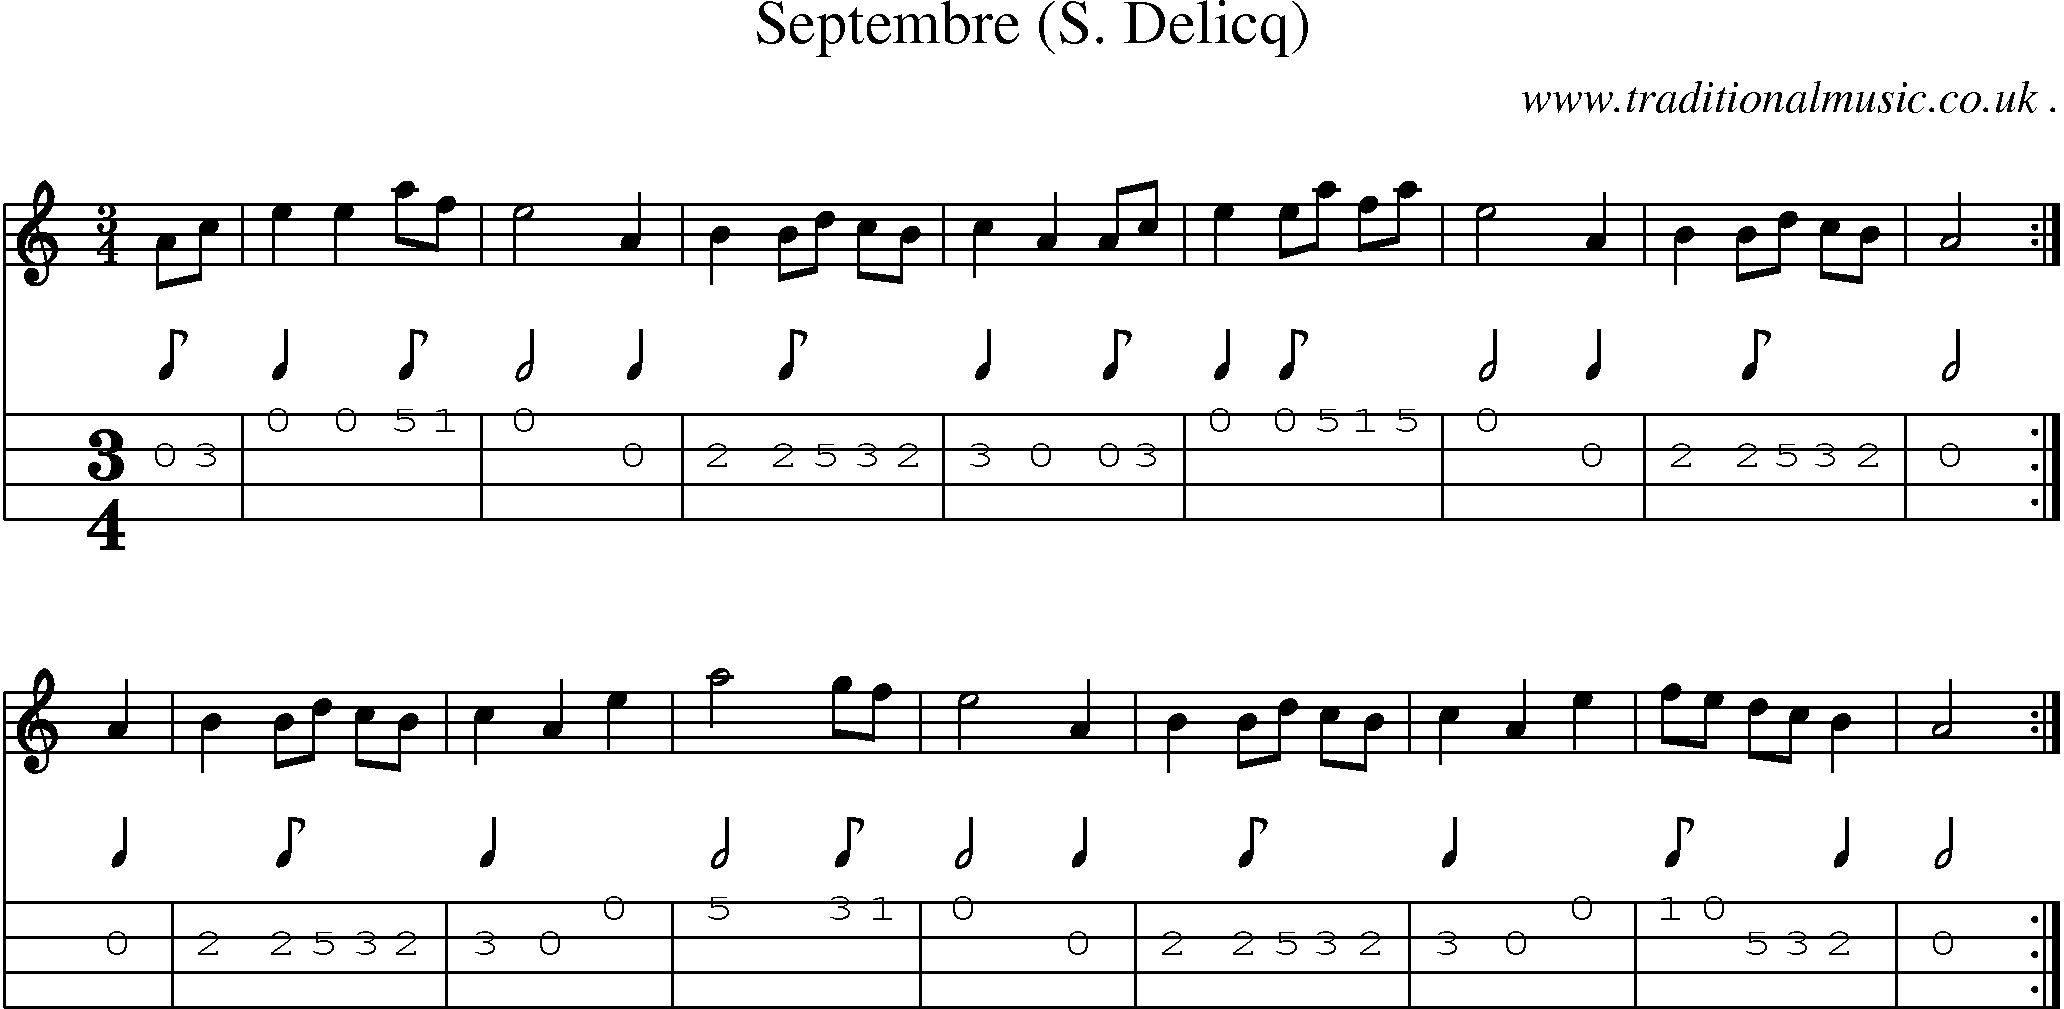 Sheet-Music and Mandolin Tabs for Septembre (s Delicq)